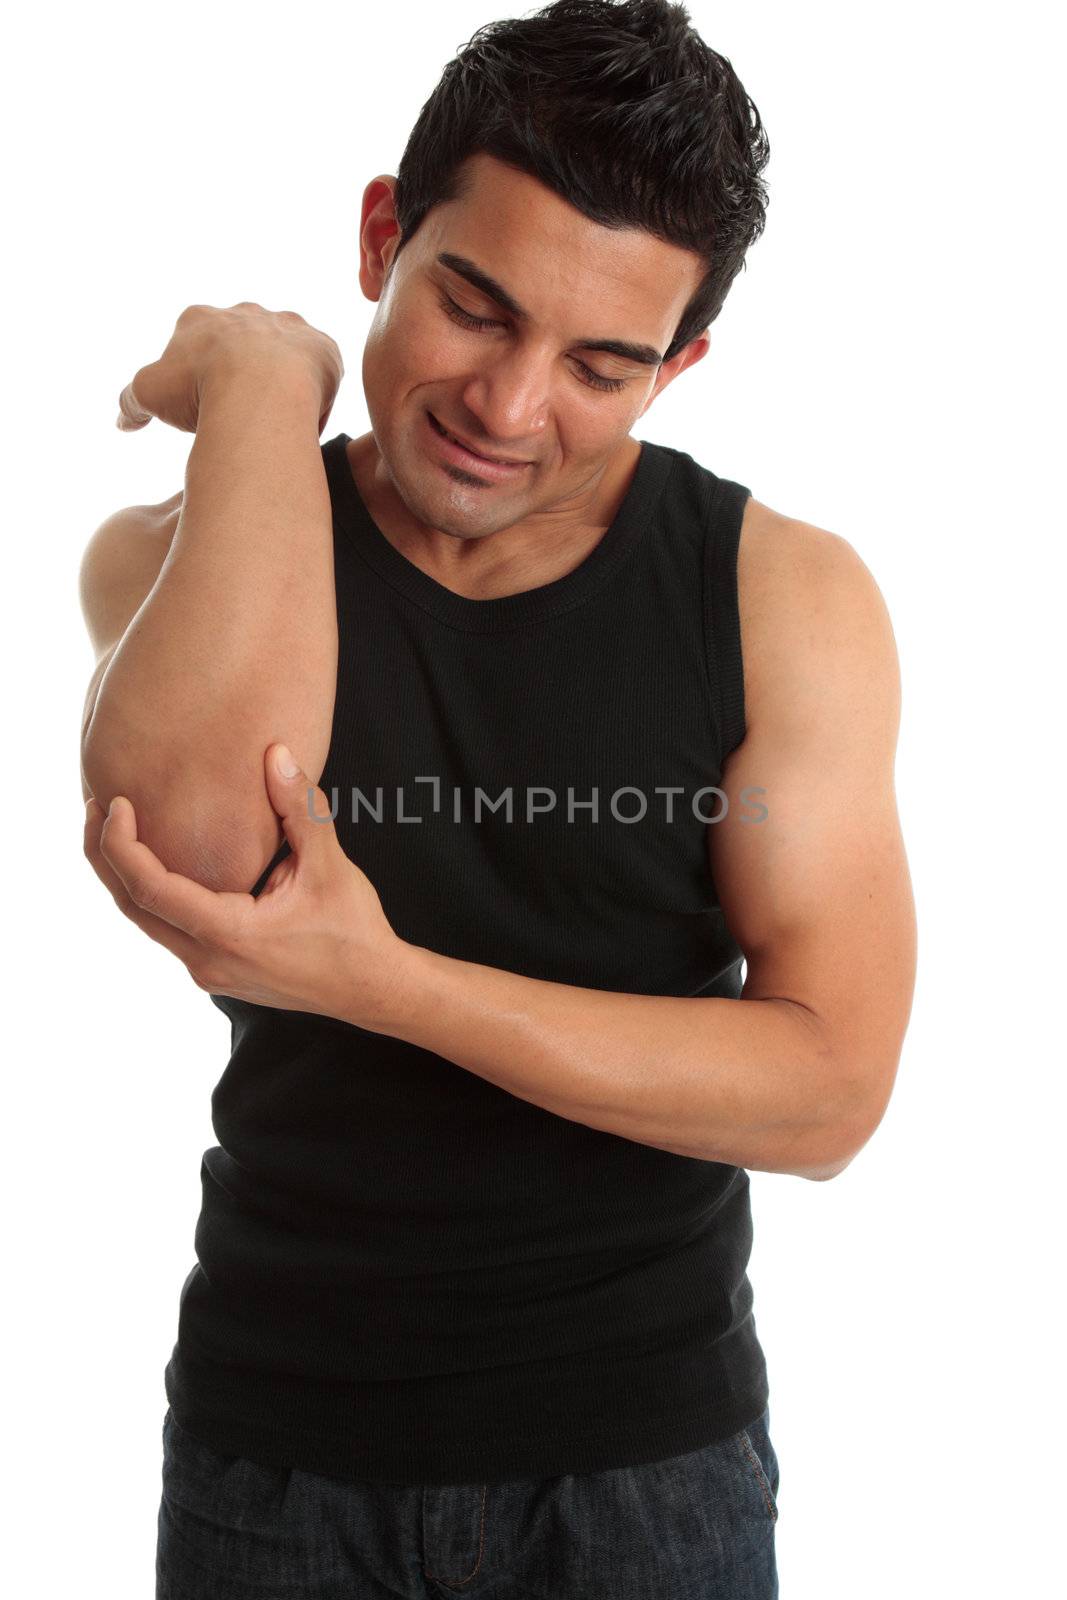 A man holding his injured hurt arm and wincing in pain.  White background.